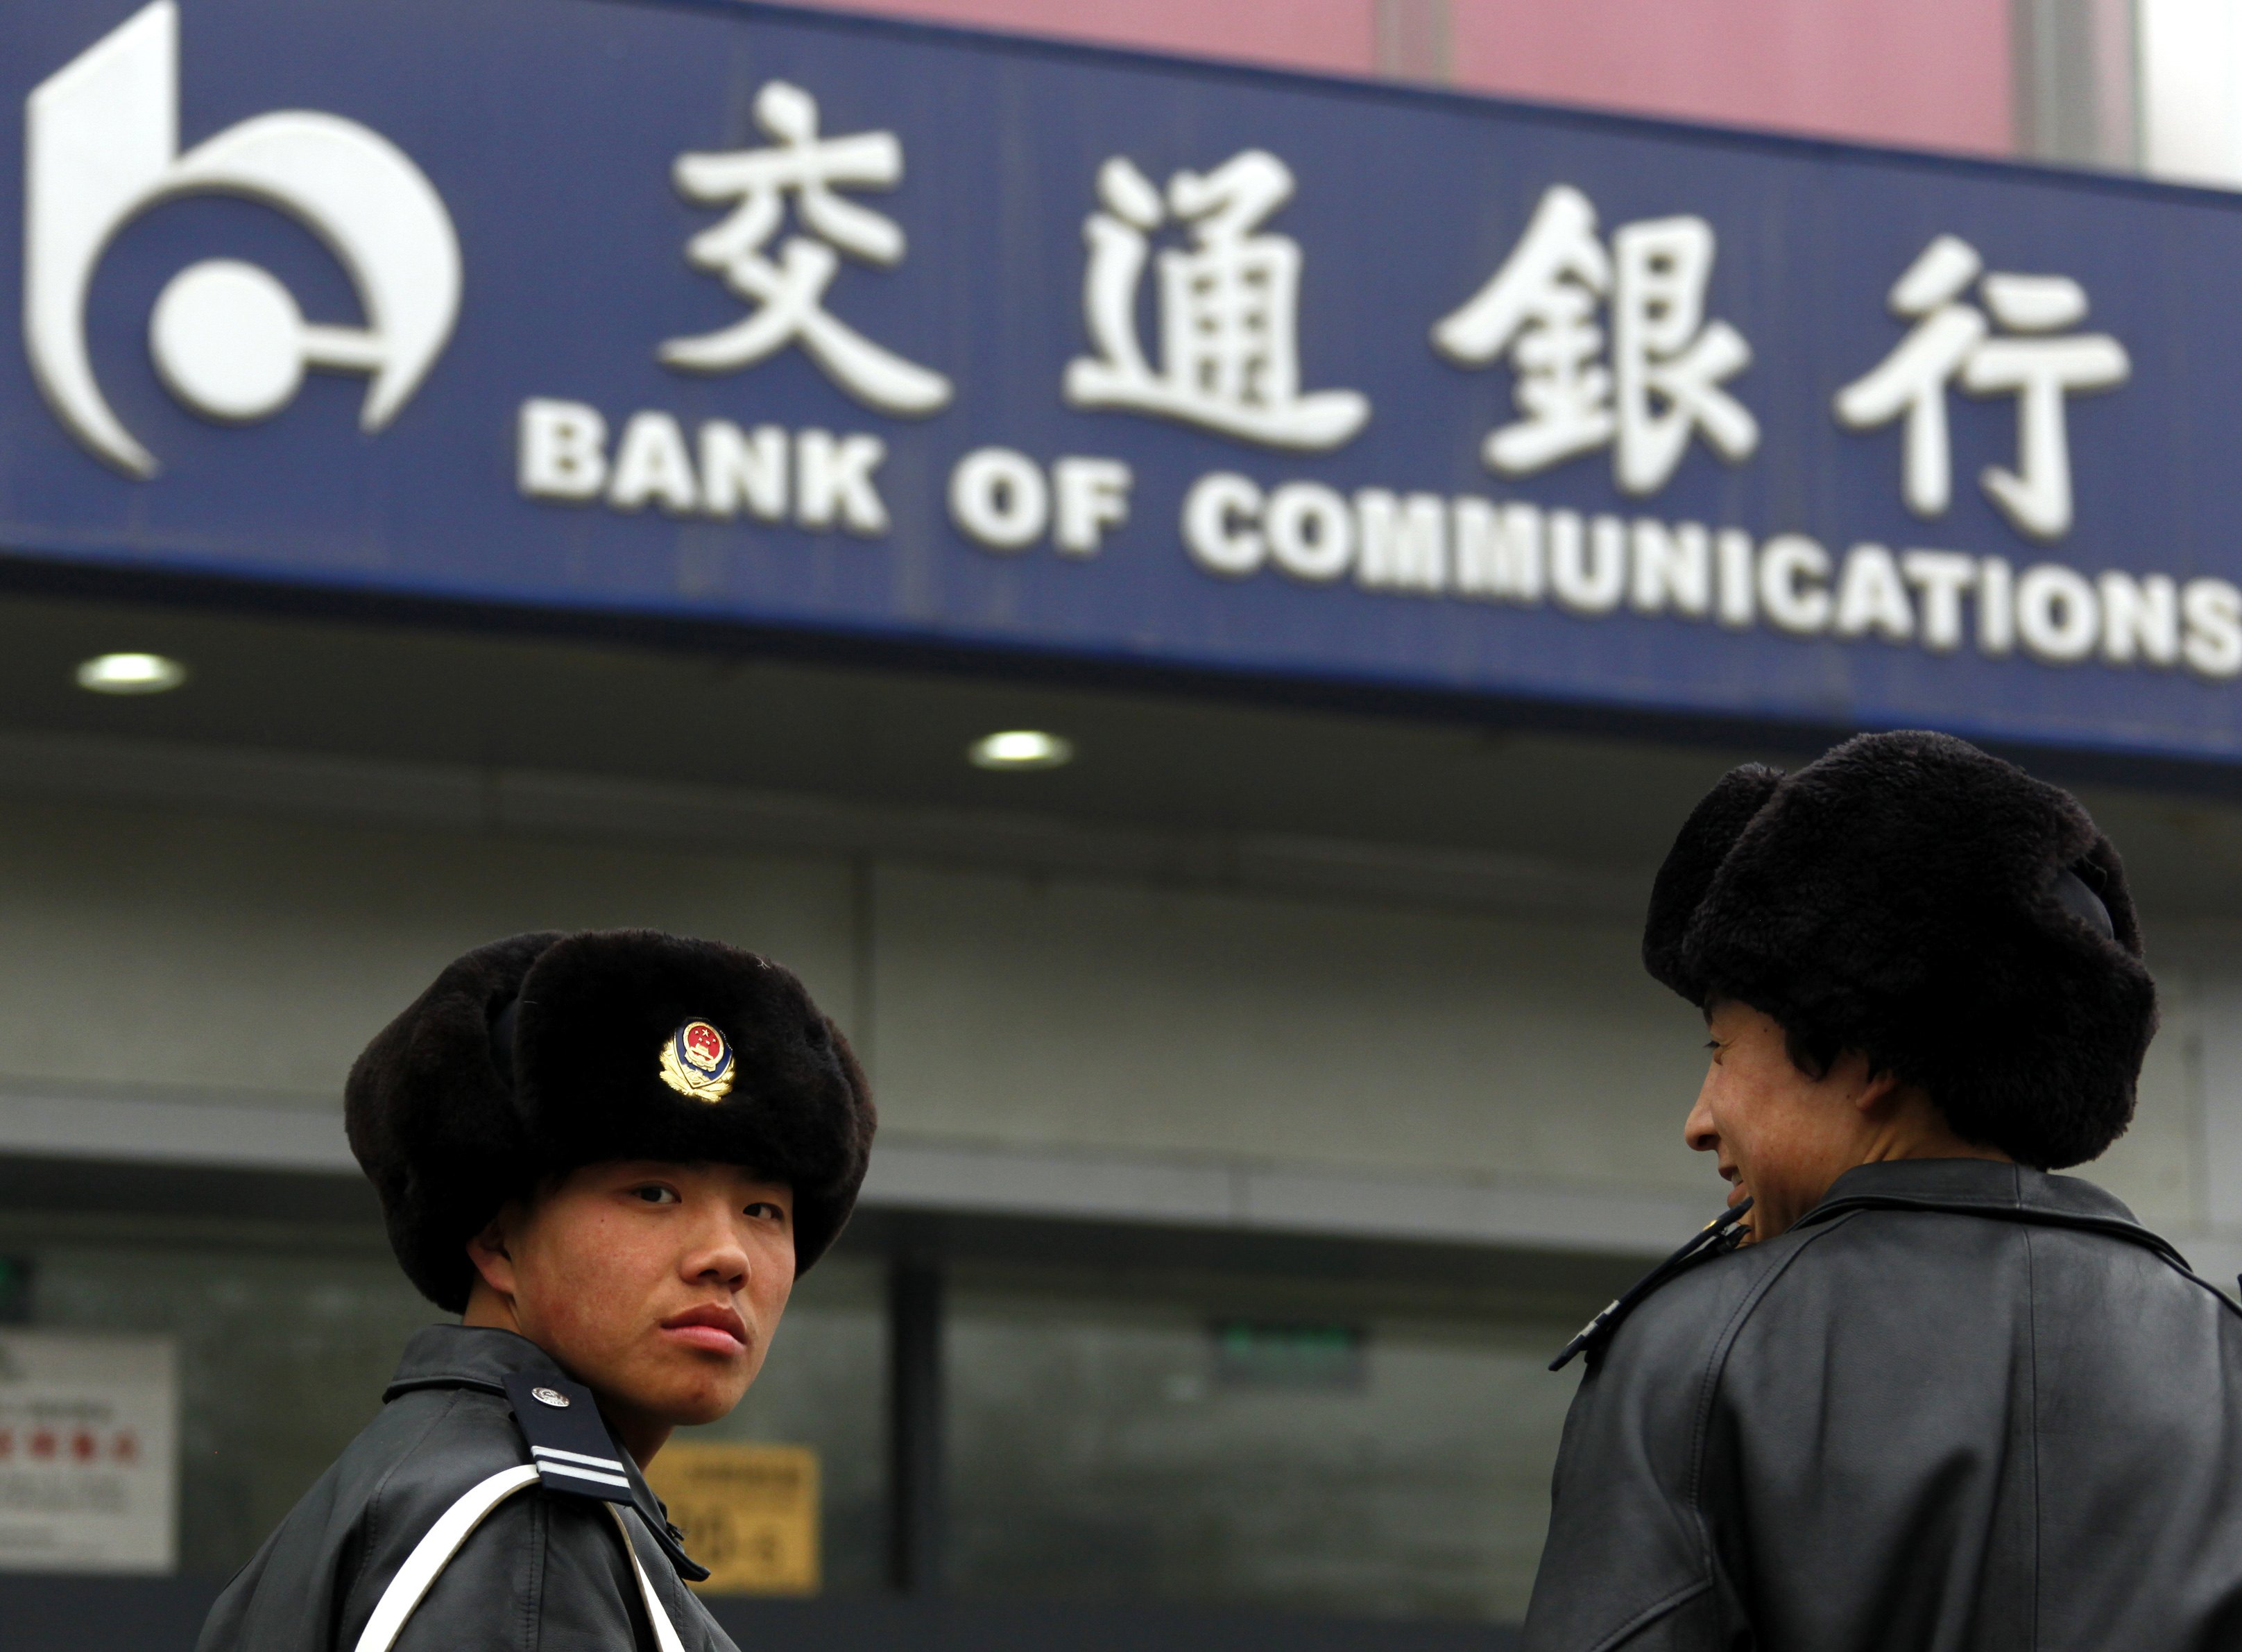 Security guards outside a branch of the Bank of Communications in central Beijing. Reuters